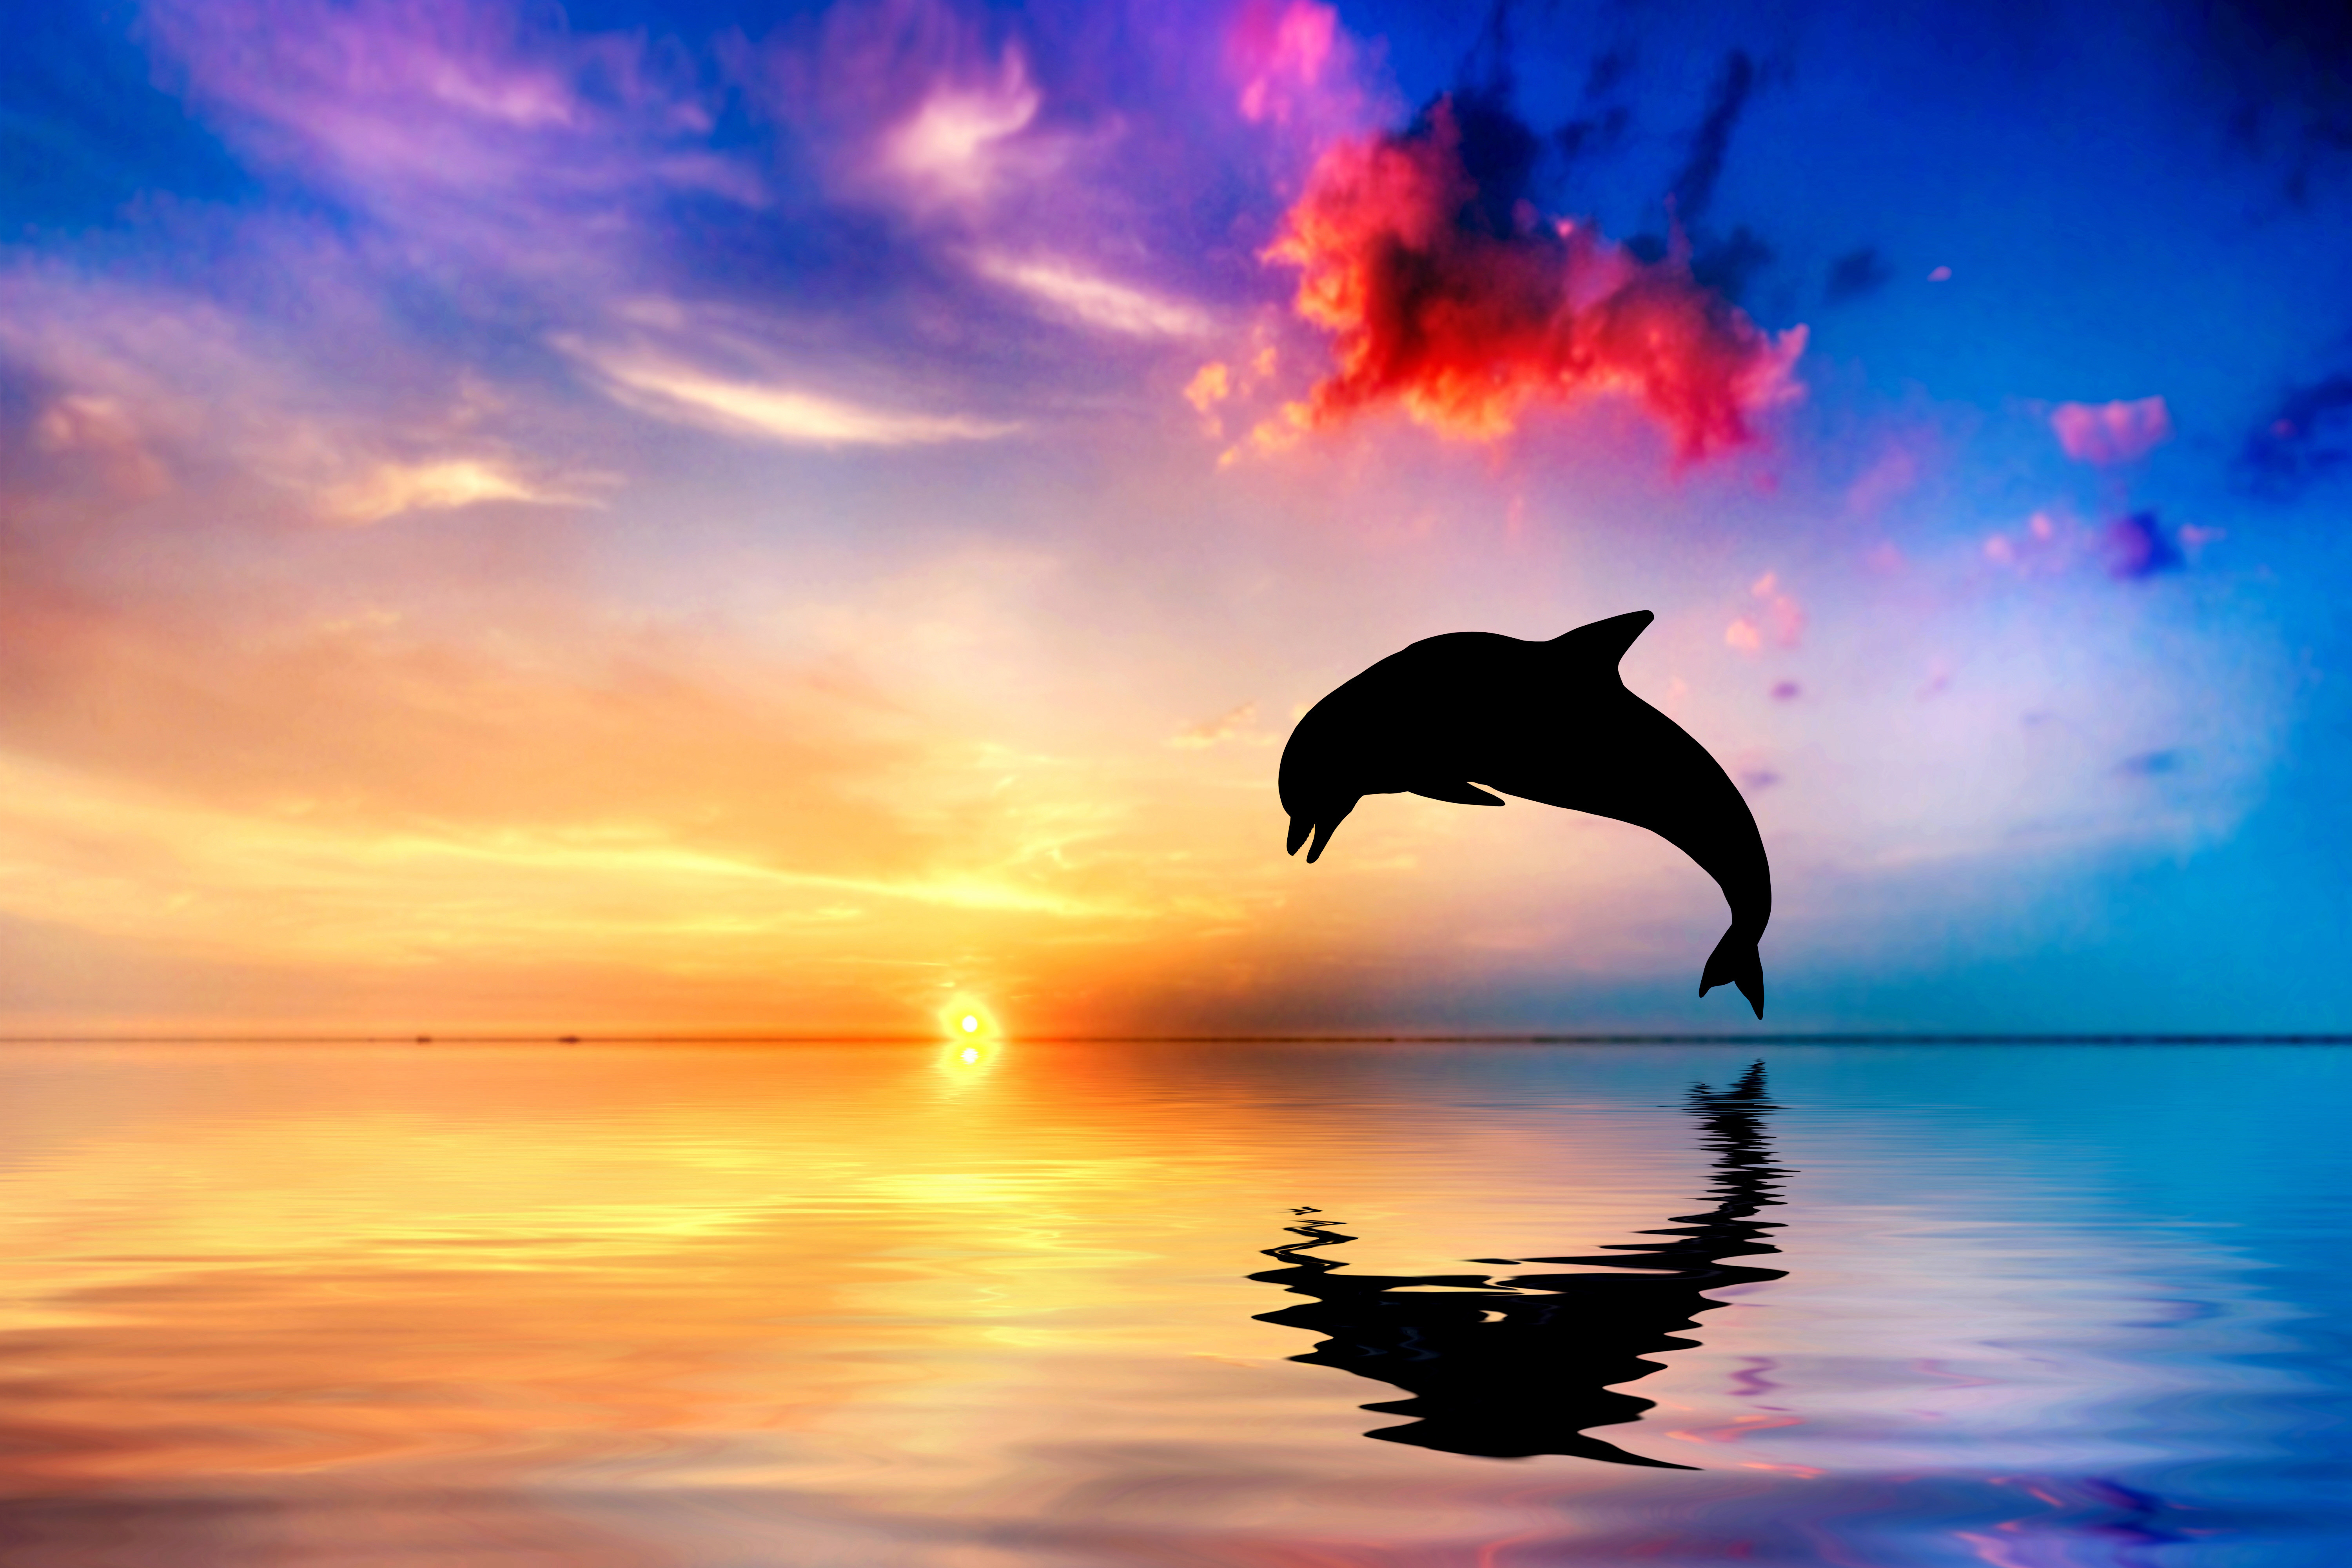 Dolphin Wallpaper - Dolphin Wallpaper - Dolphin Jumping Out Of Water At Sunset , HD Wallpaper & Backgrounds